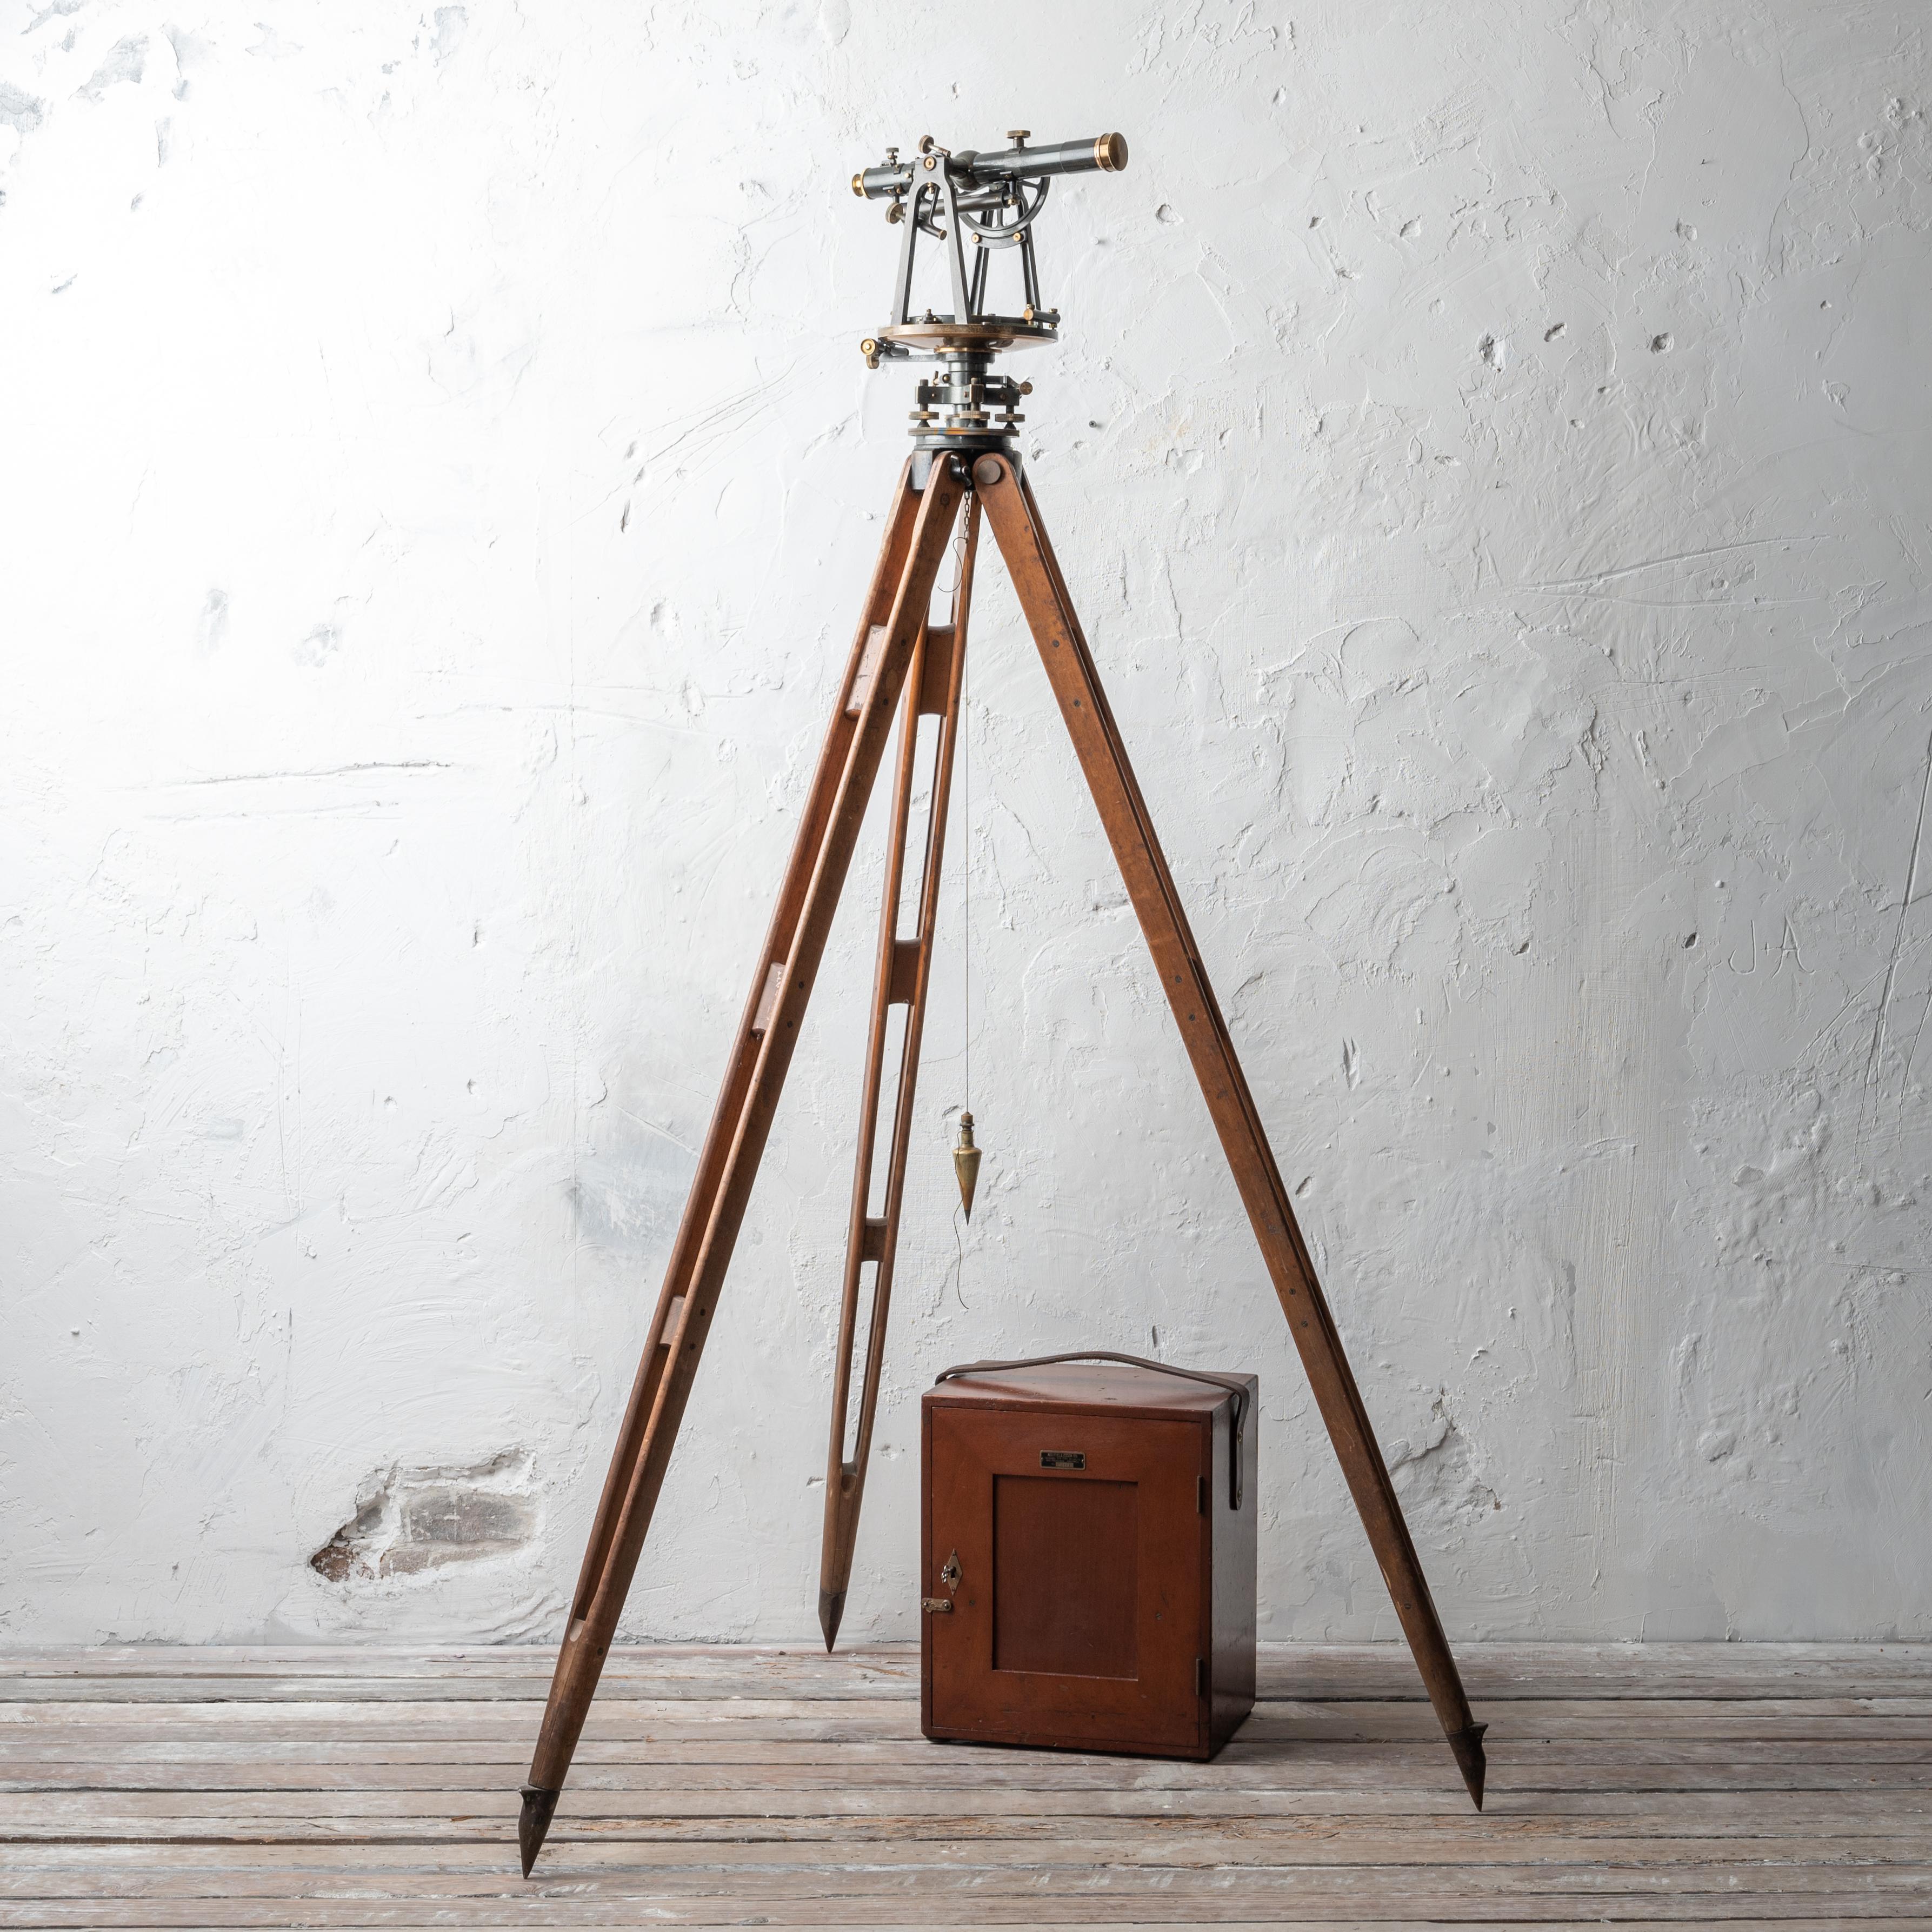 A 1912 Keuffel & Esser Co. railroad surveyor's transit. 

Includes outfitted mahogany case. All original with matching serials.

Approximately 70 inches tall with a 24 inch leg spread.

